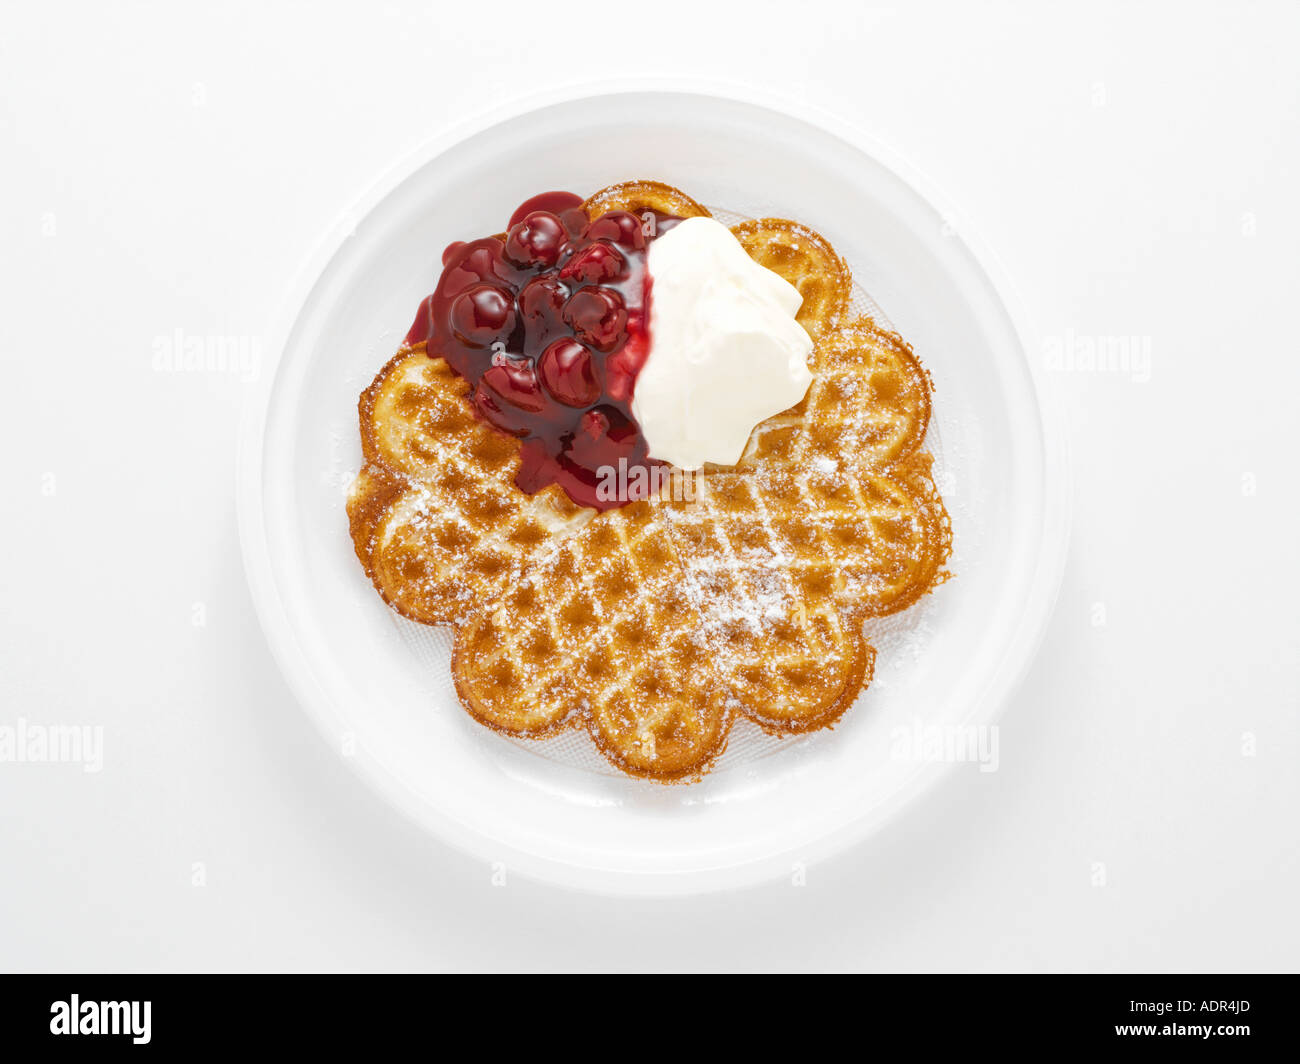 Waffle with cherries and cream Stock Photo